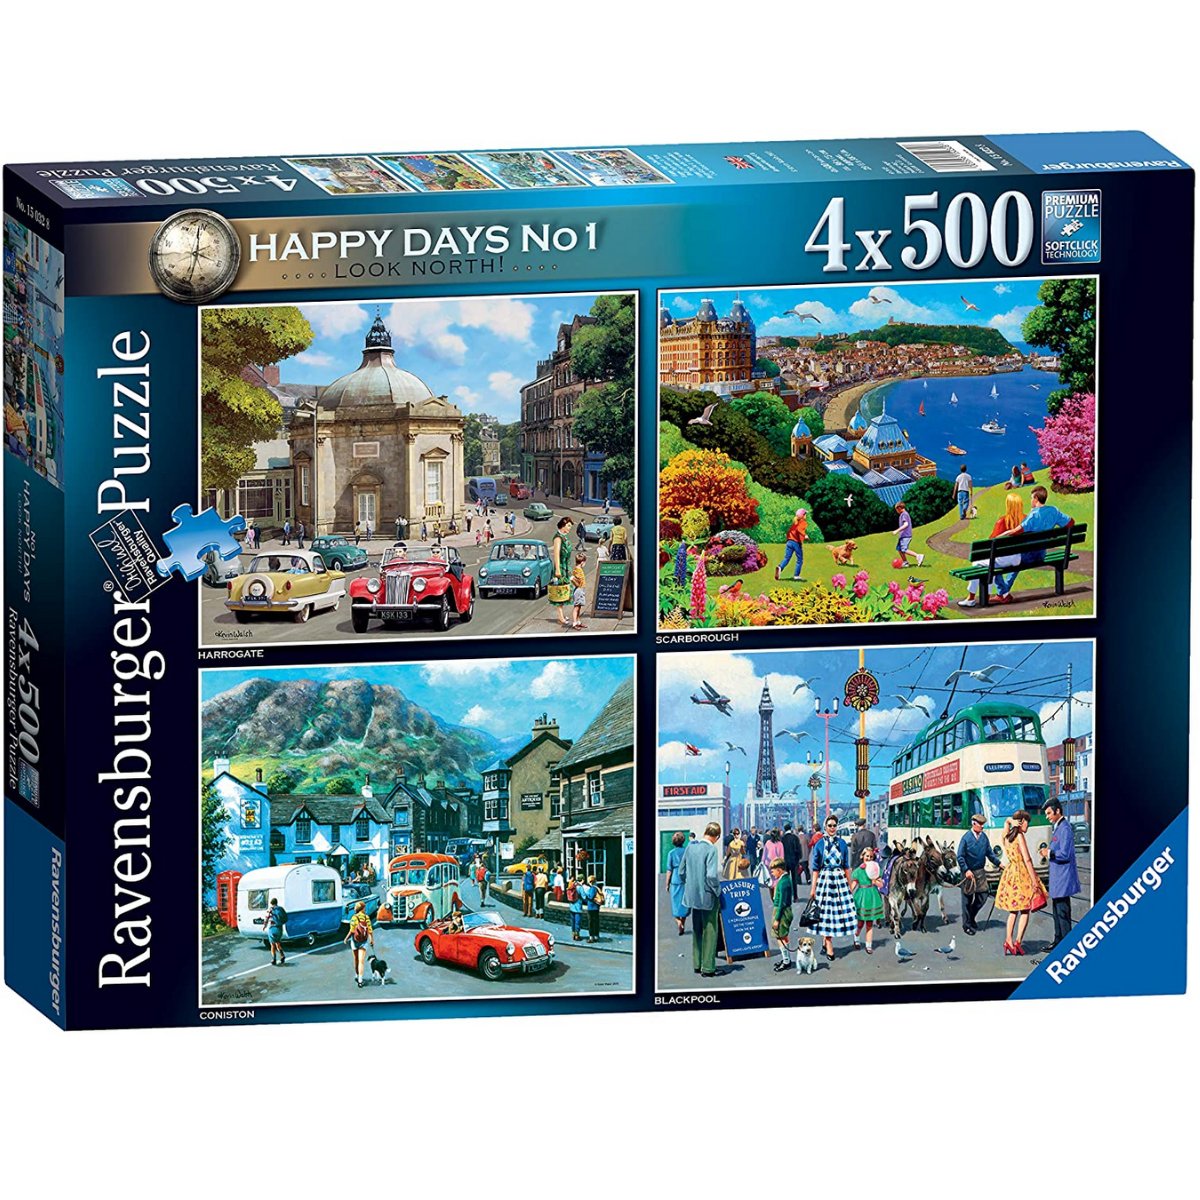 Ravensburger Happy Days No 1, Look North! - 4x 500 Piece Jigsaw Puzzle - Phillips Hobbies